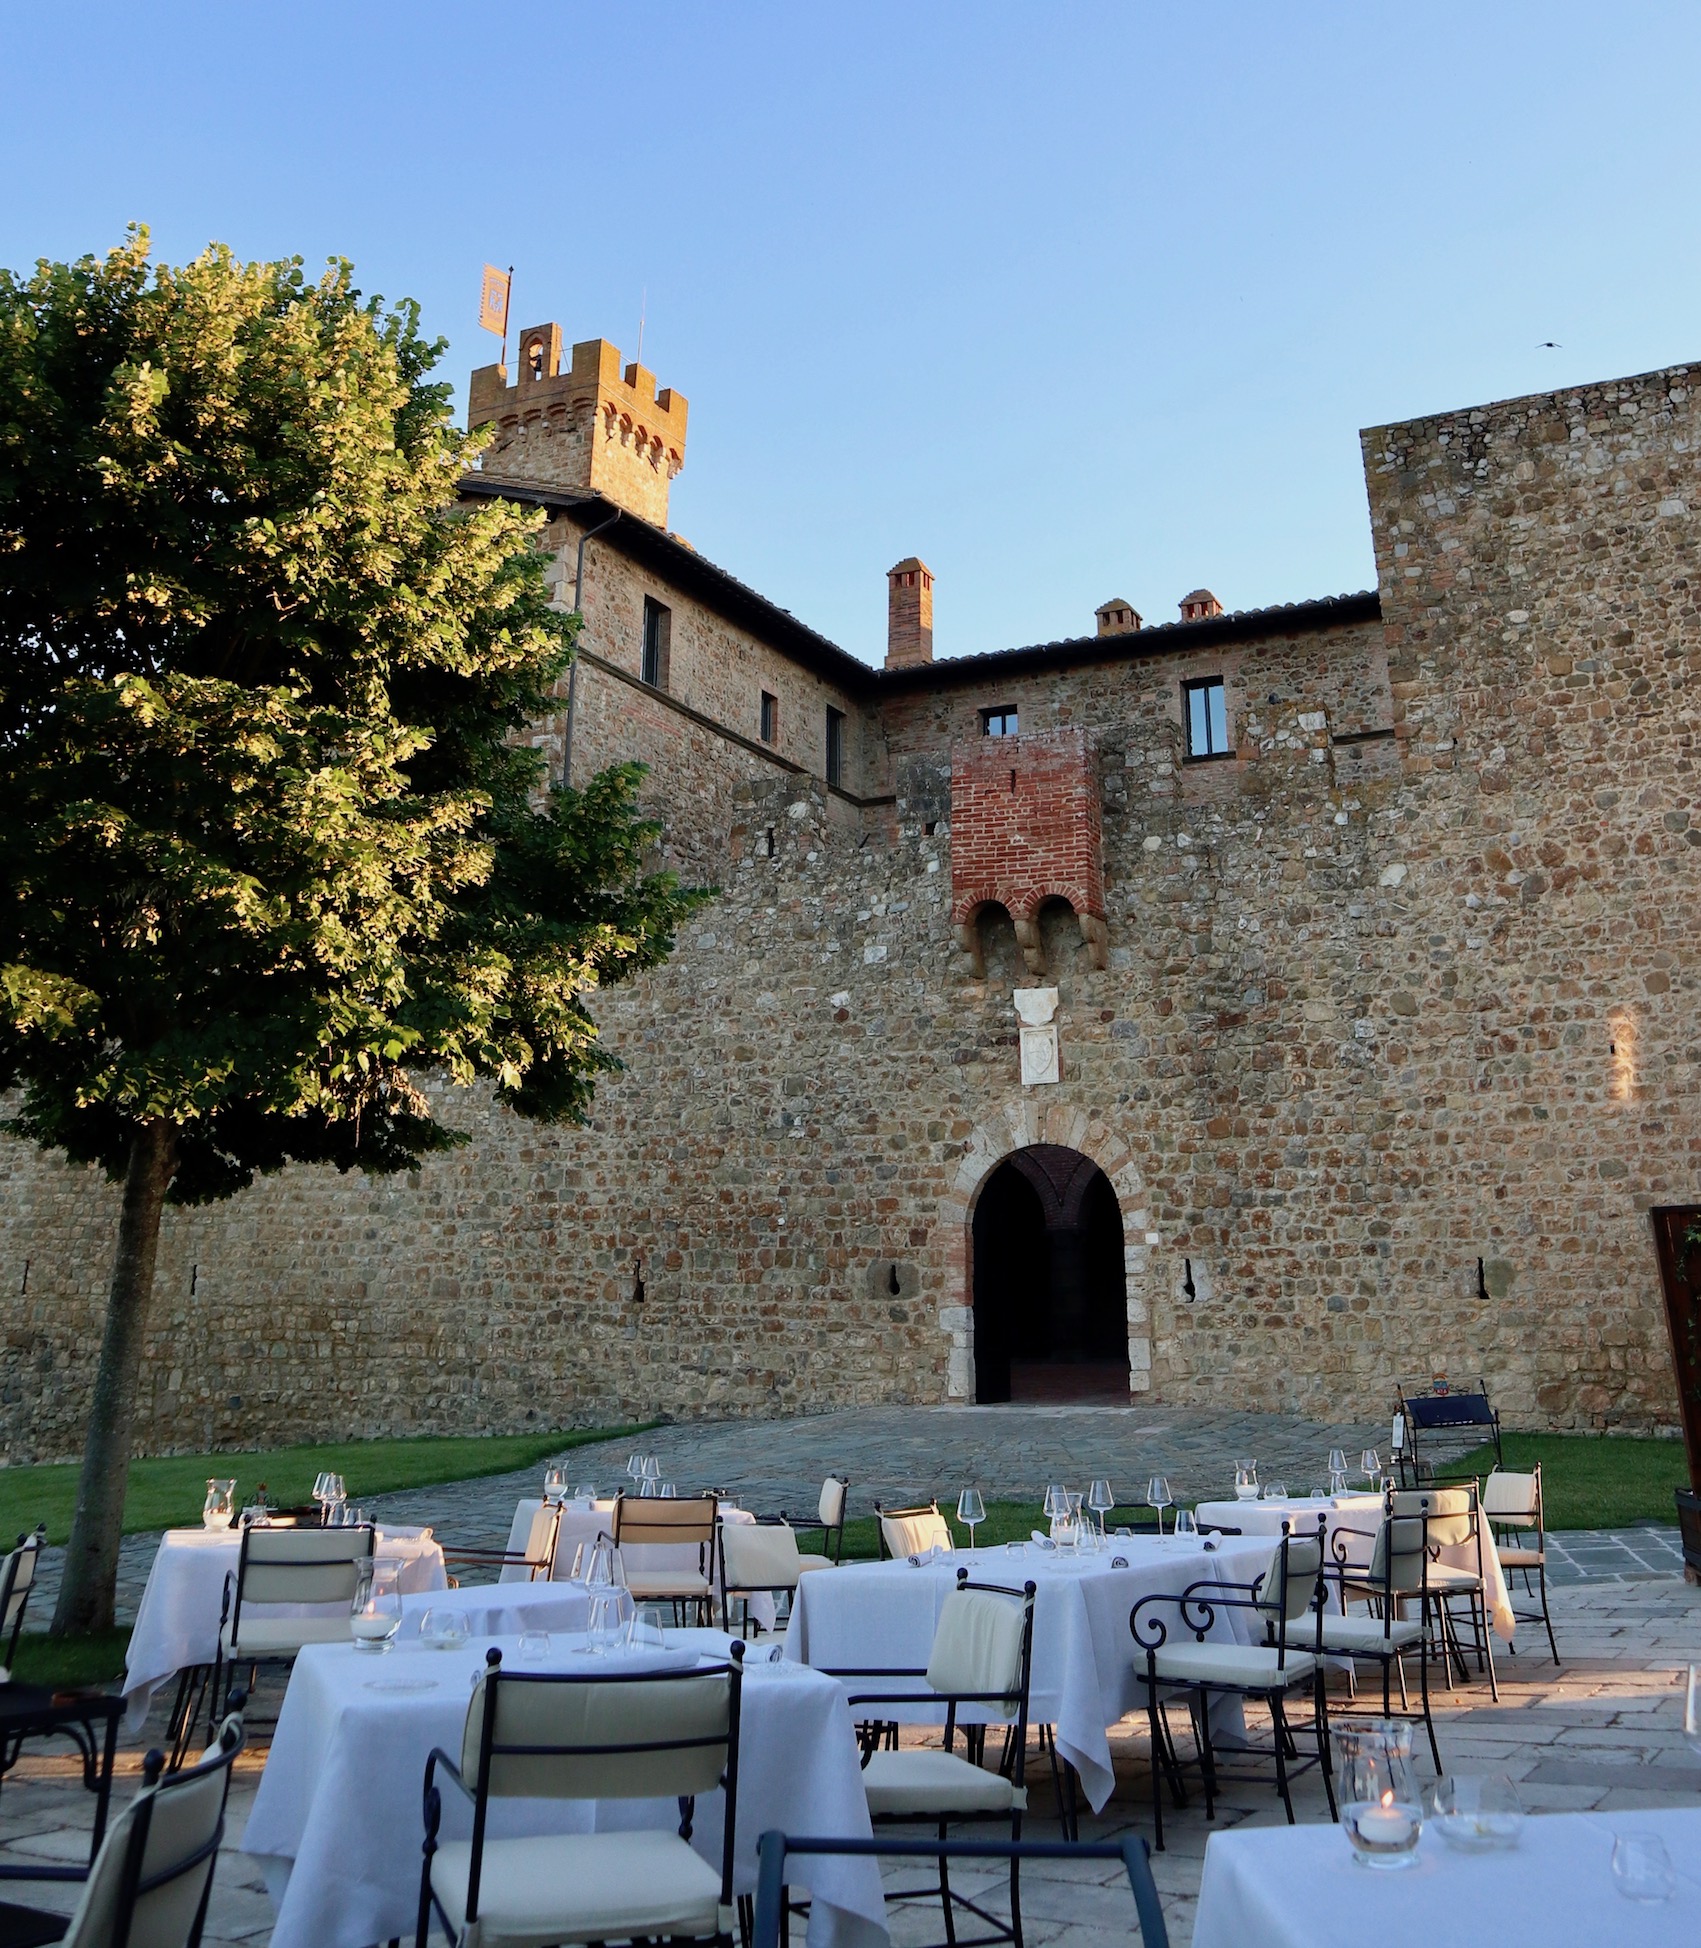 A stunning dinner setting outside a castle at Catstello Banfi il Borgo